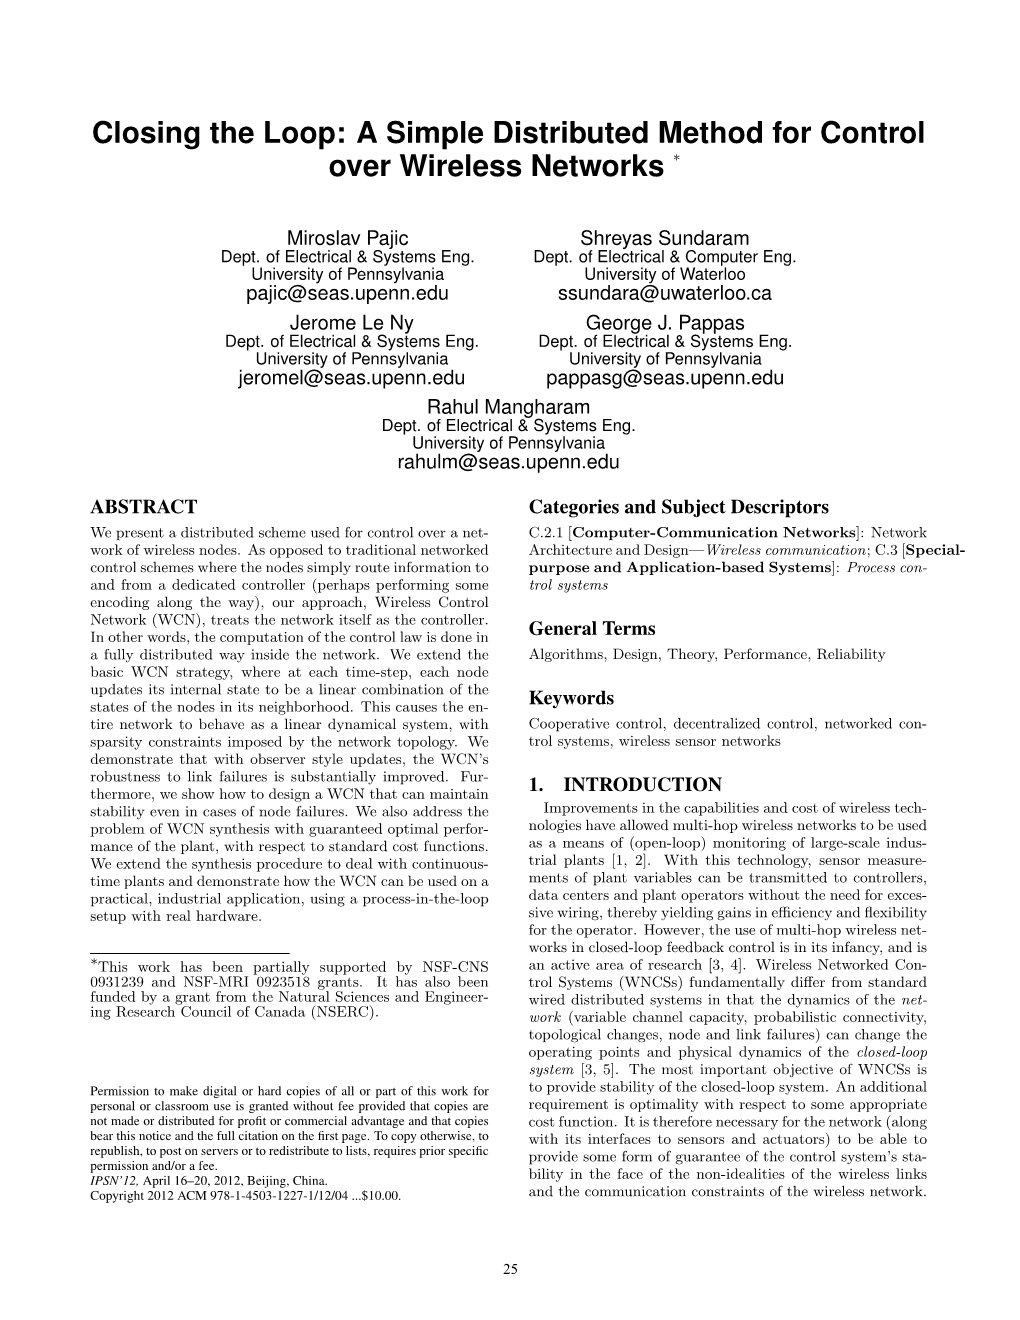 Closing the Loop: a Simple Distributed Method for Control Over Wireless Networks ∗